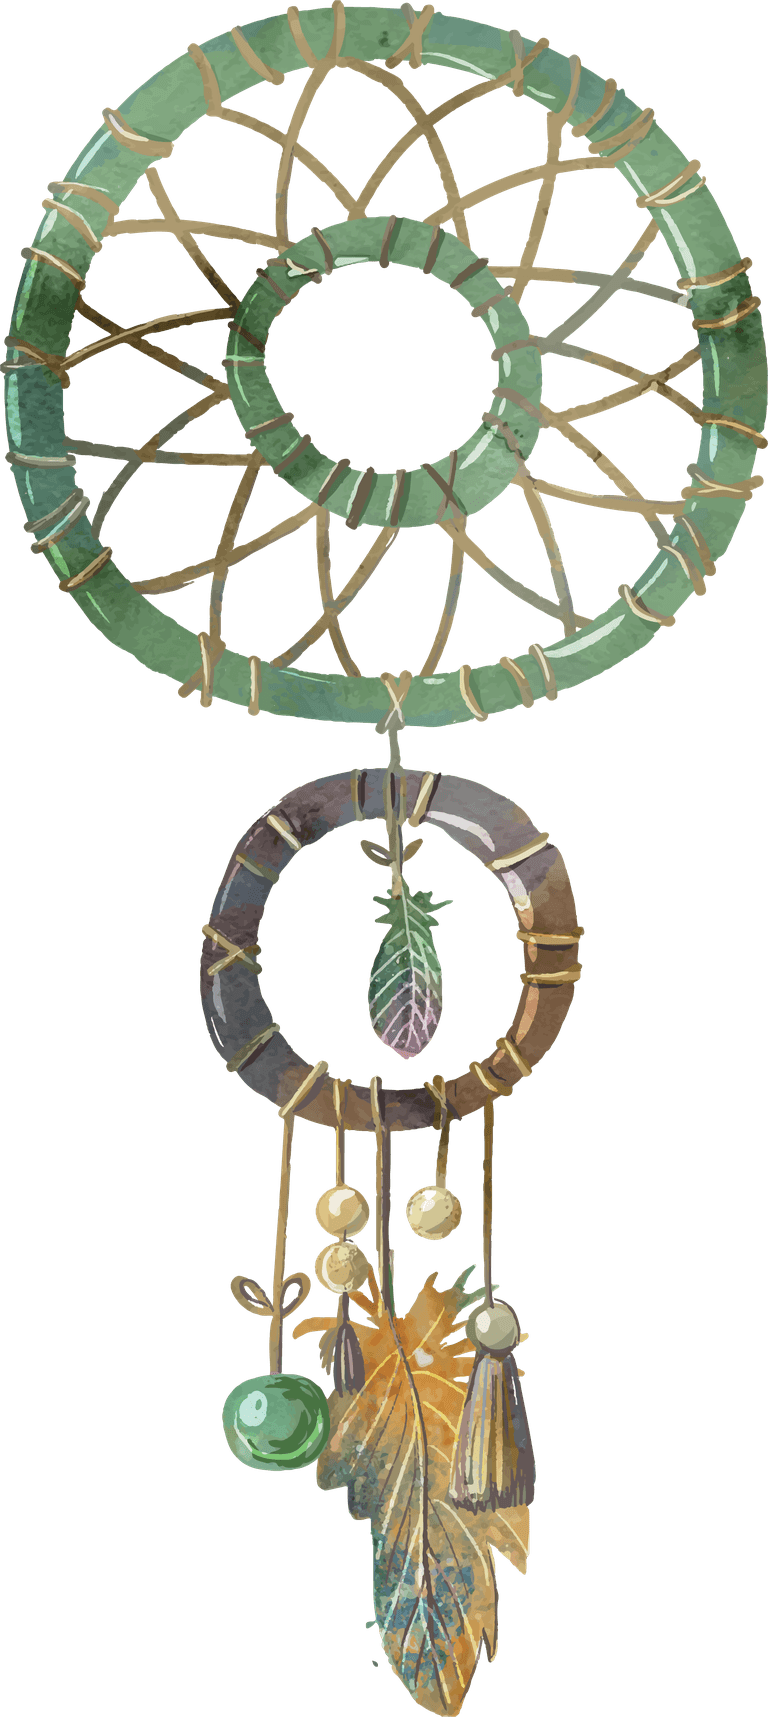 watercolor dreamcatcher with boho elements